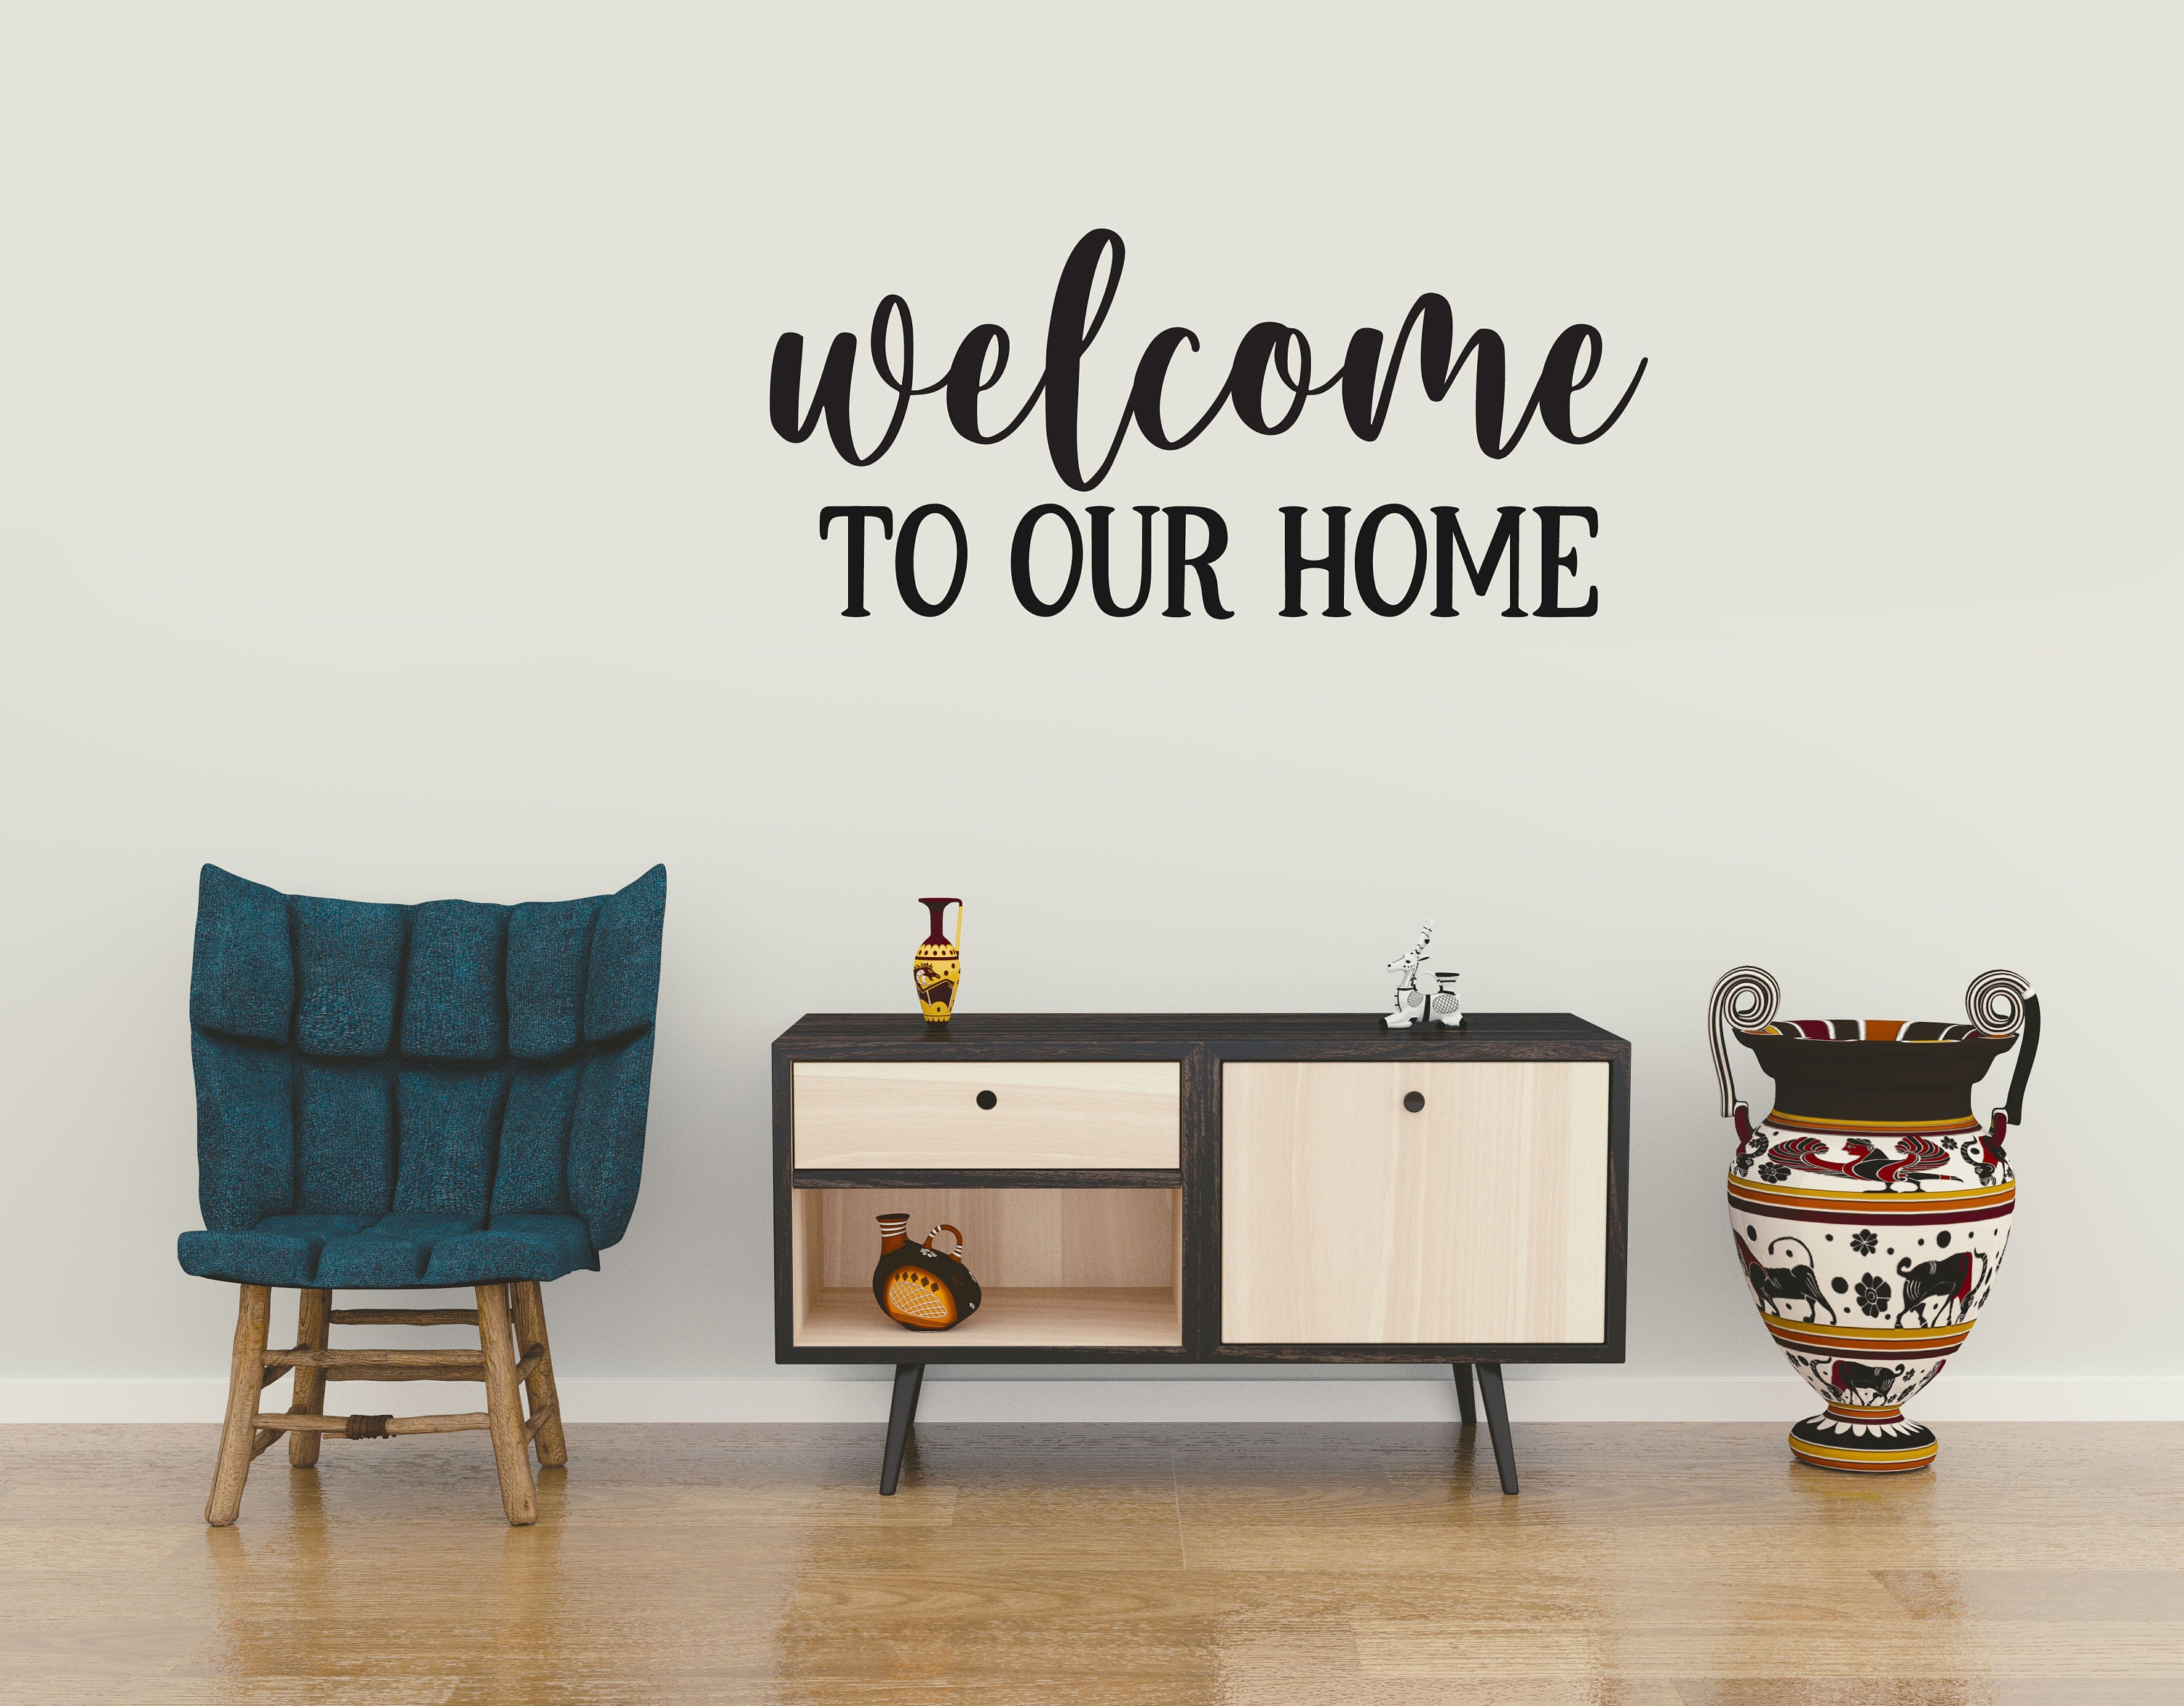 Welcome to Our Home - Vinyl Wall Decal - Home Decor for Walls, Doors, Great as Housewarming Gift or Present,